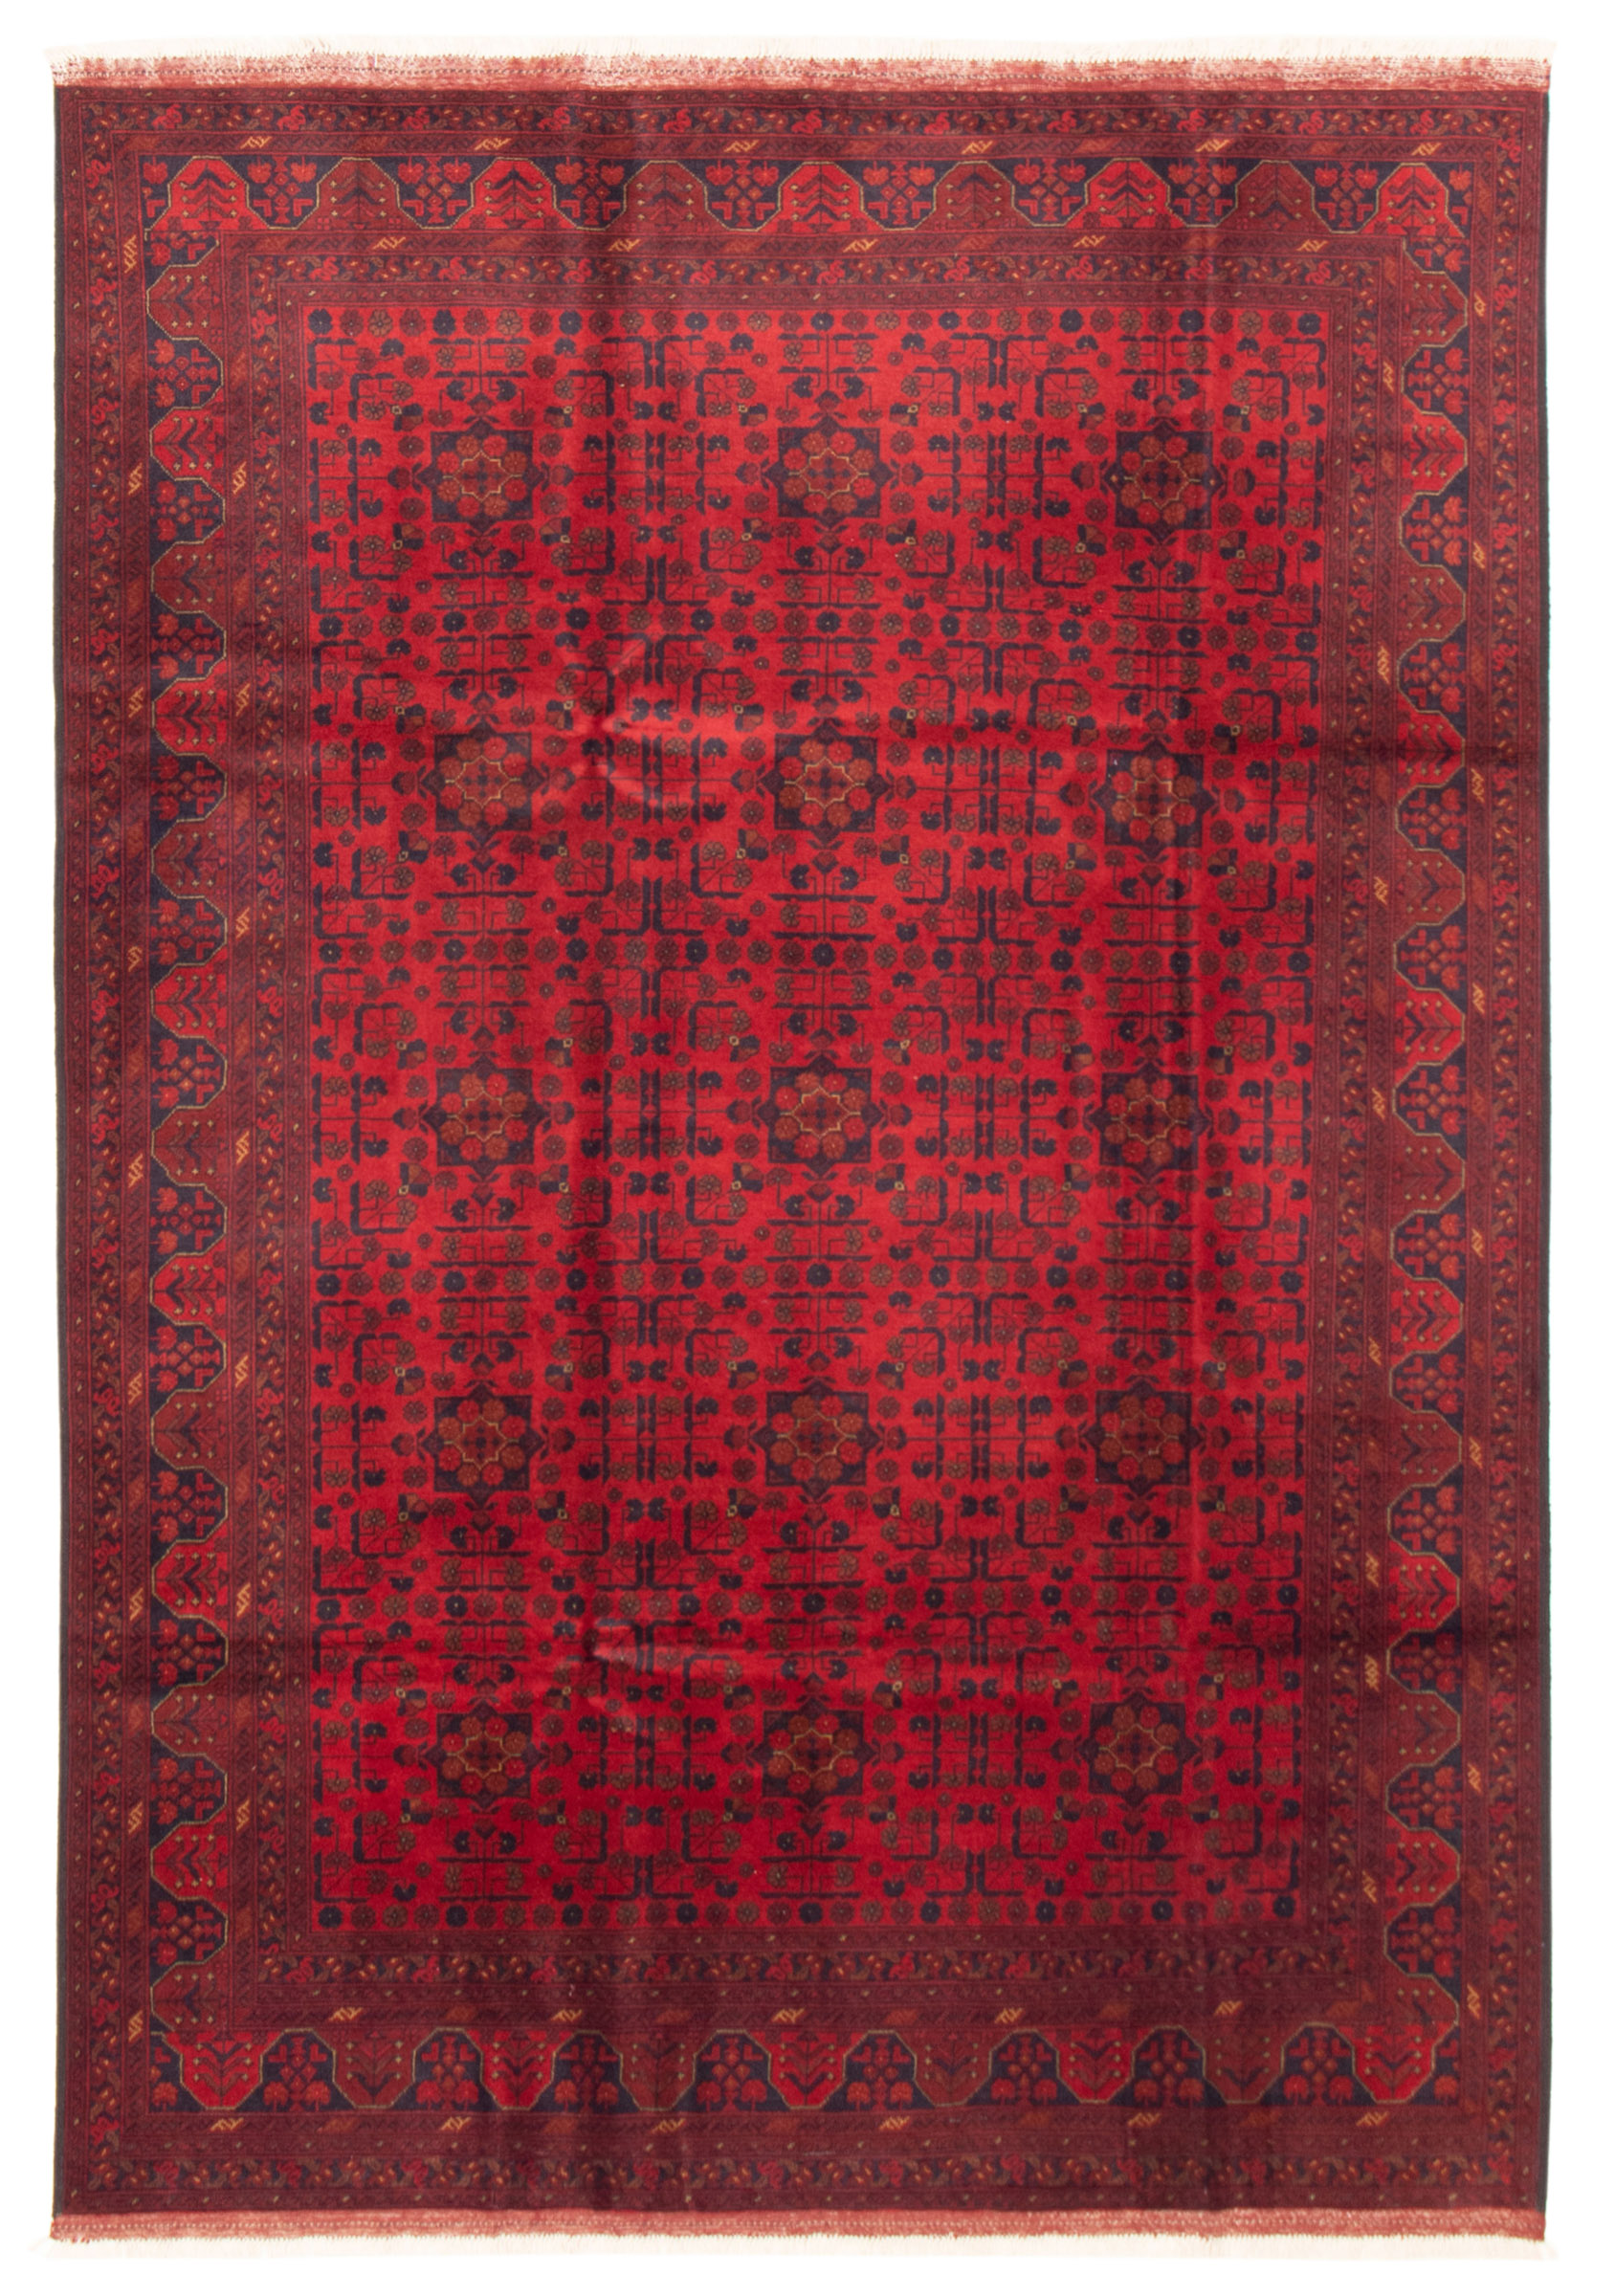 eCarpet Gallery Area Rug for Living Room Hand-Knotted Wool Rug 328796 Finest Khal Mohammadi Bordered Red Rug 5'7 x 7'9 Bedroom 